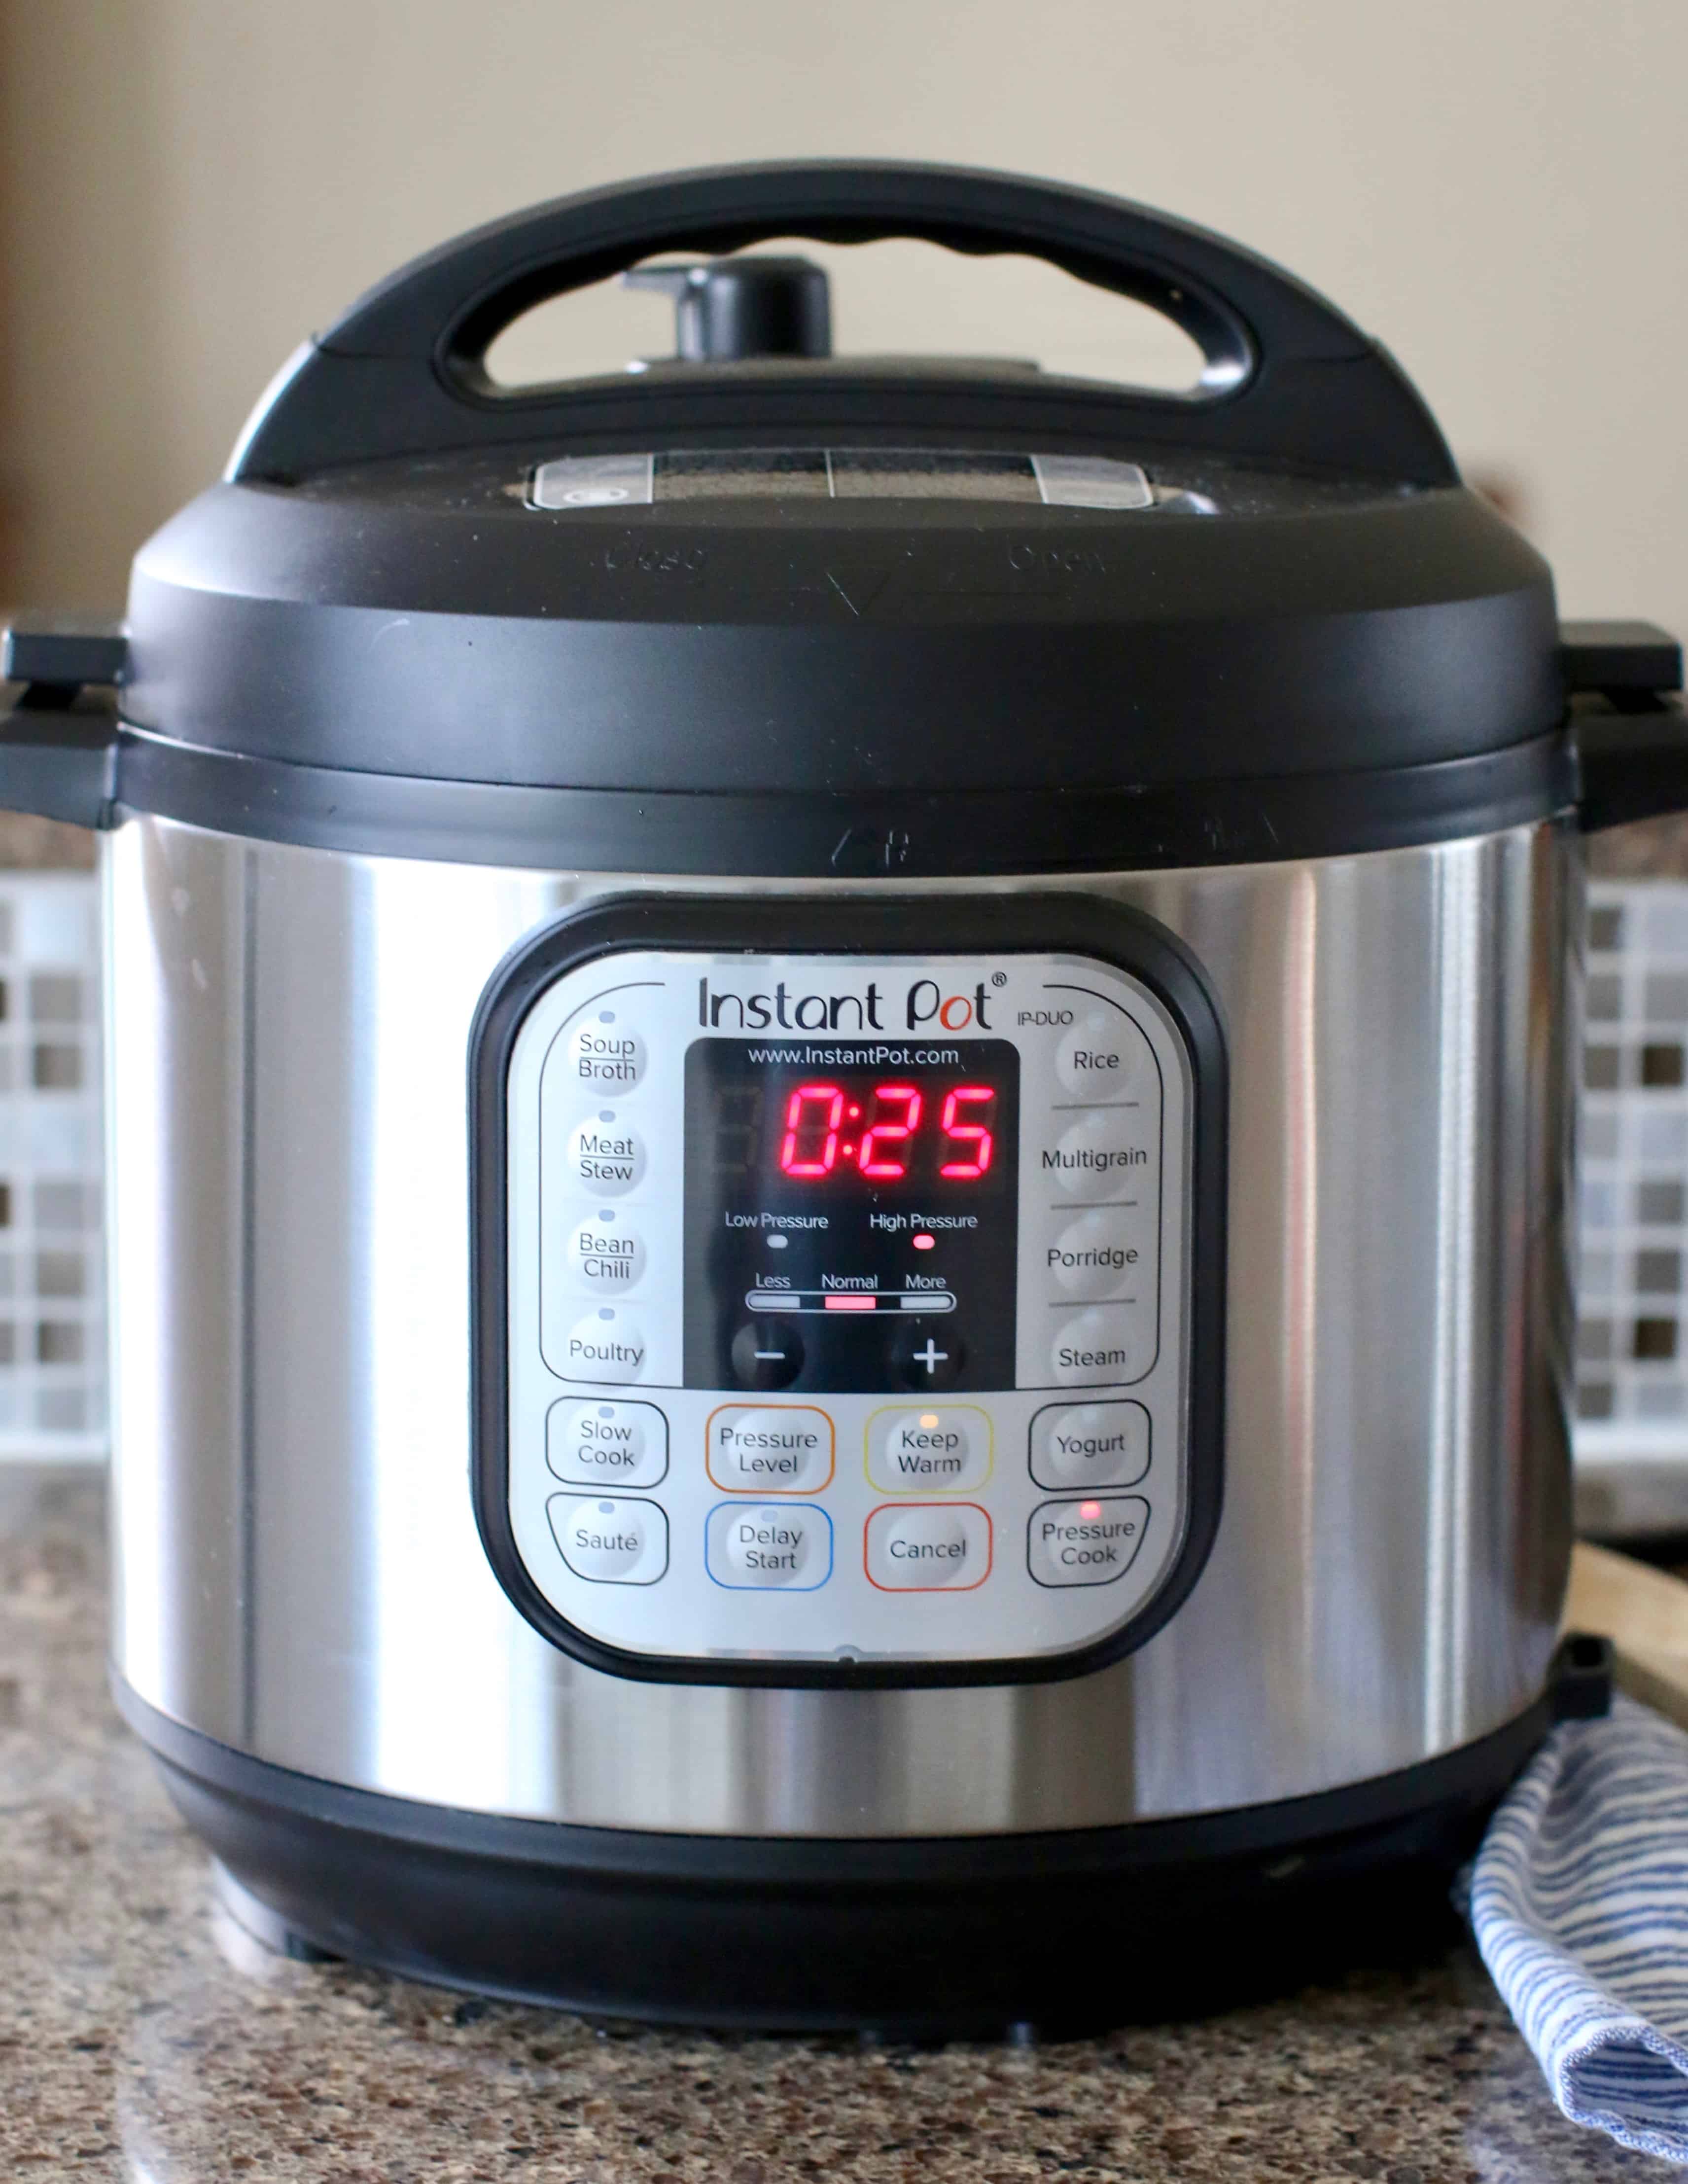 Instant Pot, cook time showing 25 minutes.